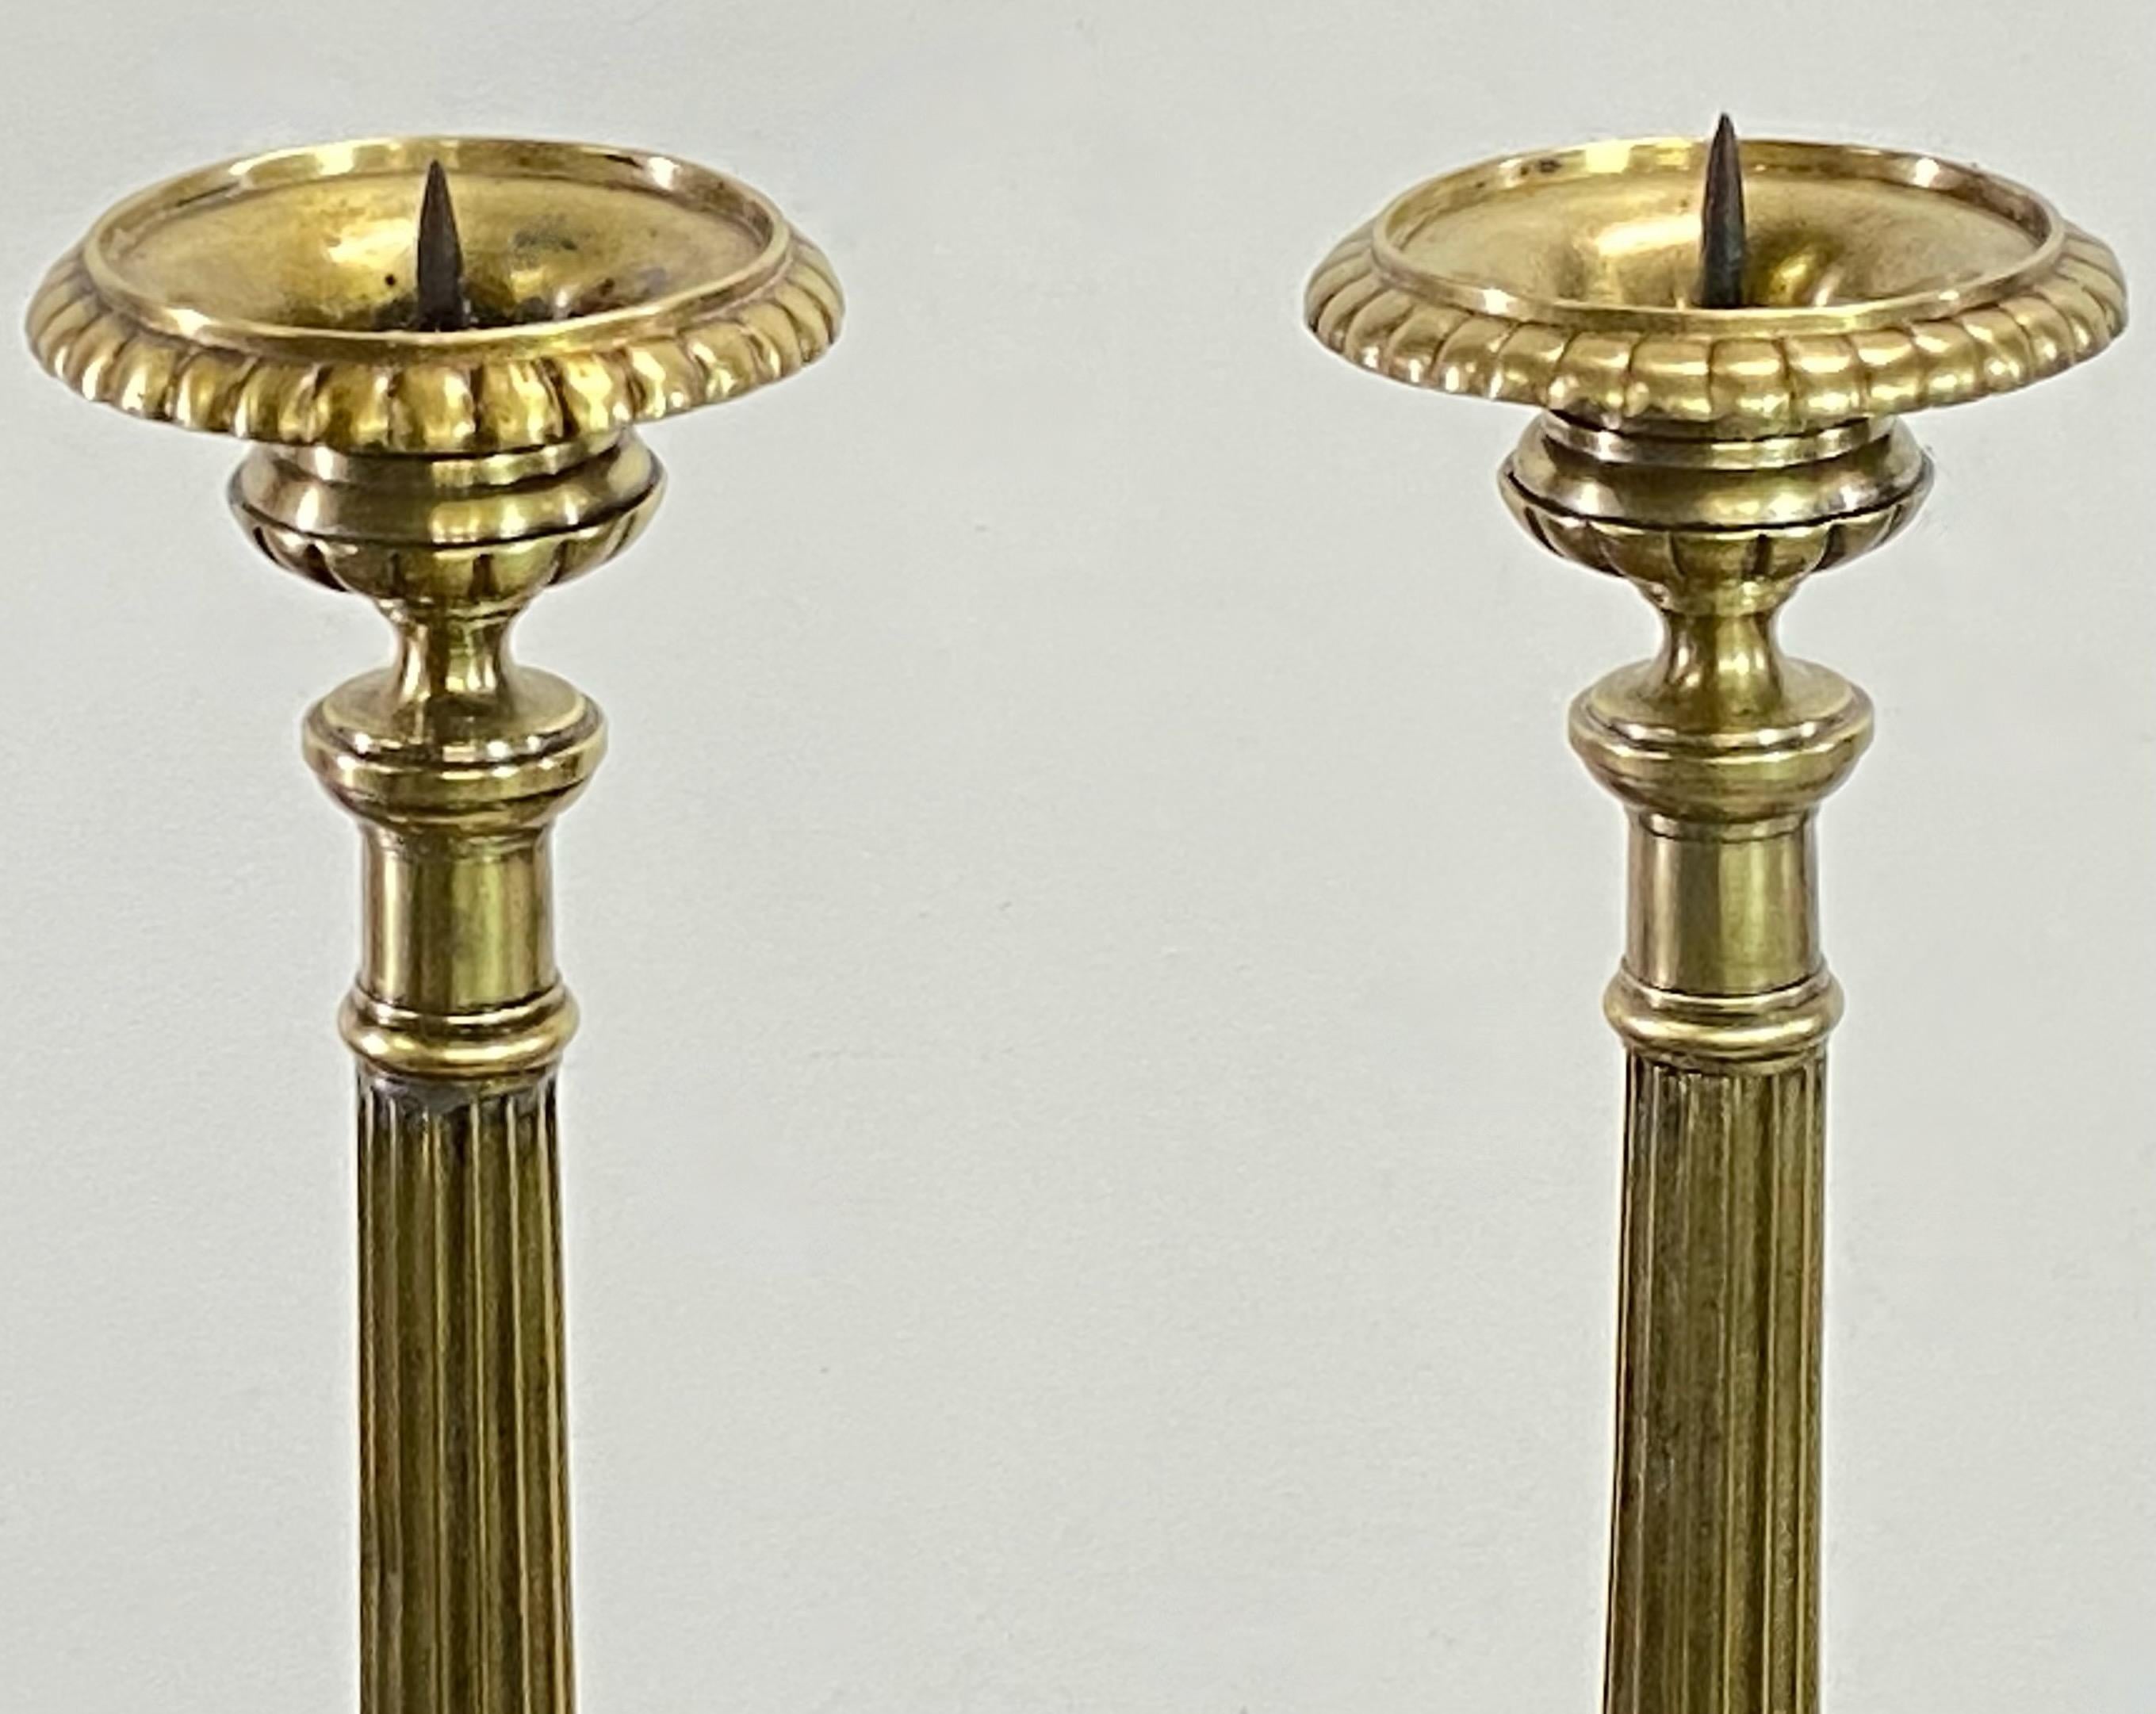 Pair of Early 19th Century European Brass Candlesticks, circa 1840 For Sale 7